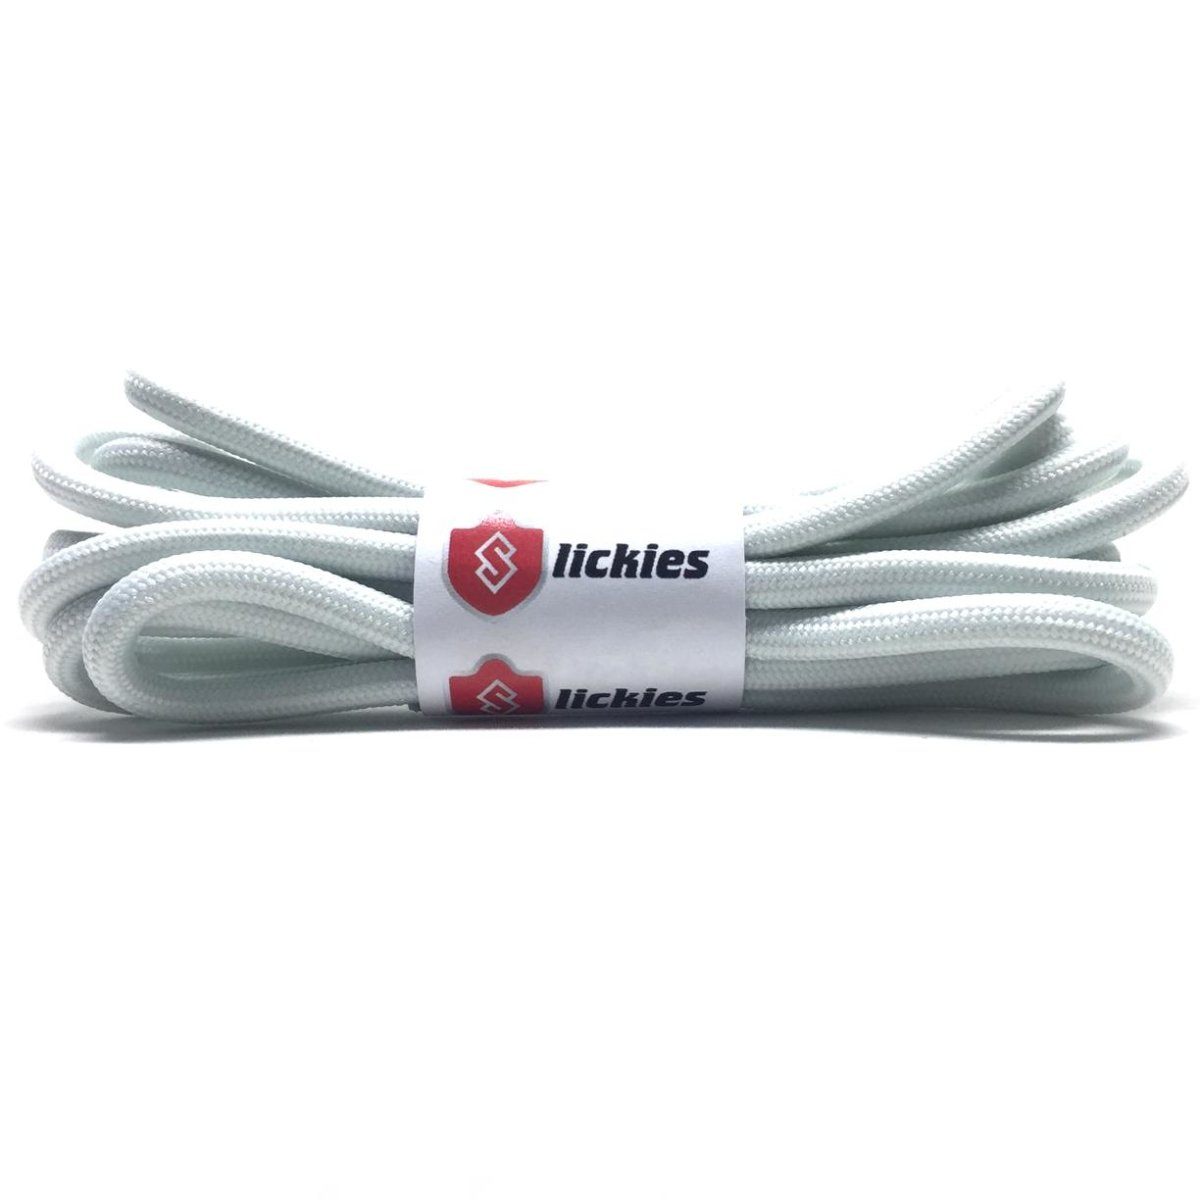 Rope Style Shoelaces Laces For Yeezy 350 Boost Shoes Fits Mens & Womens  Sizes